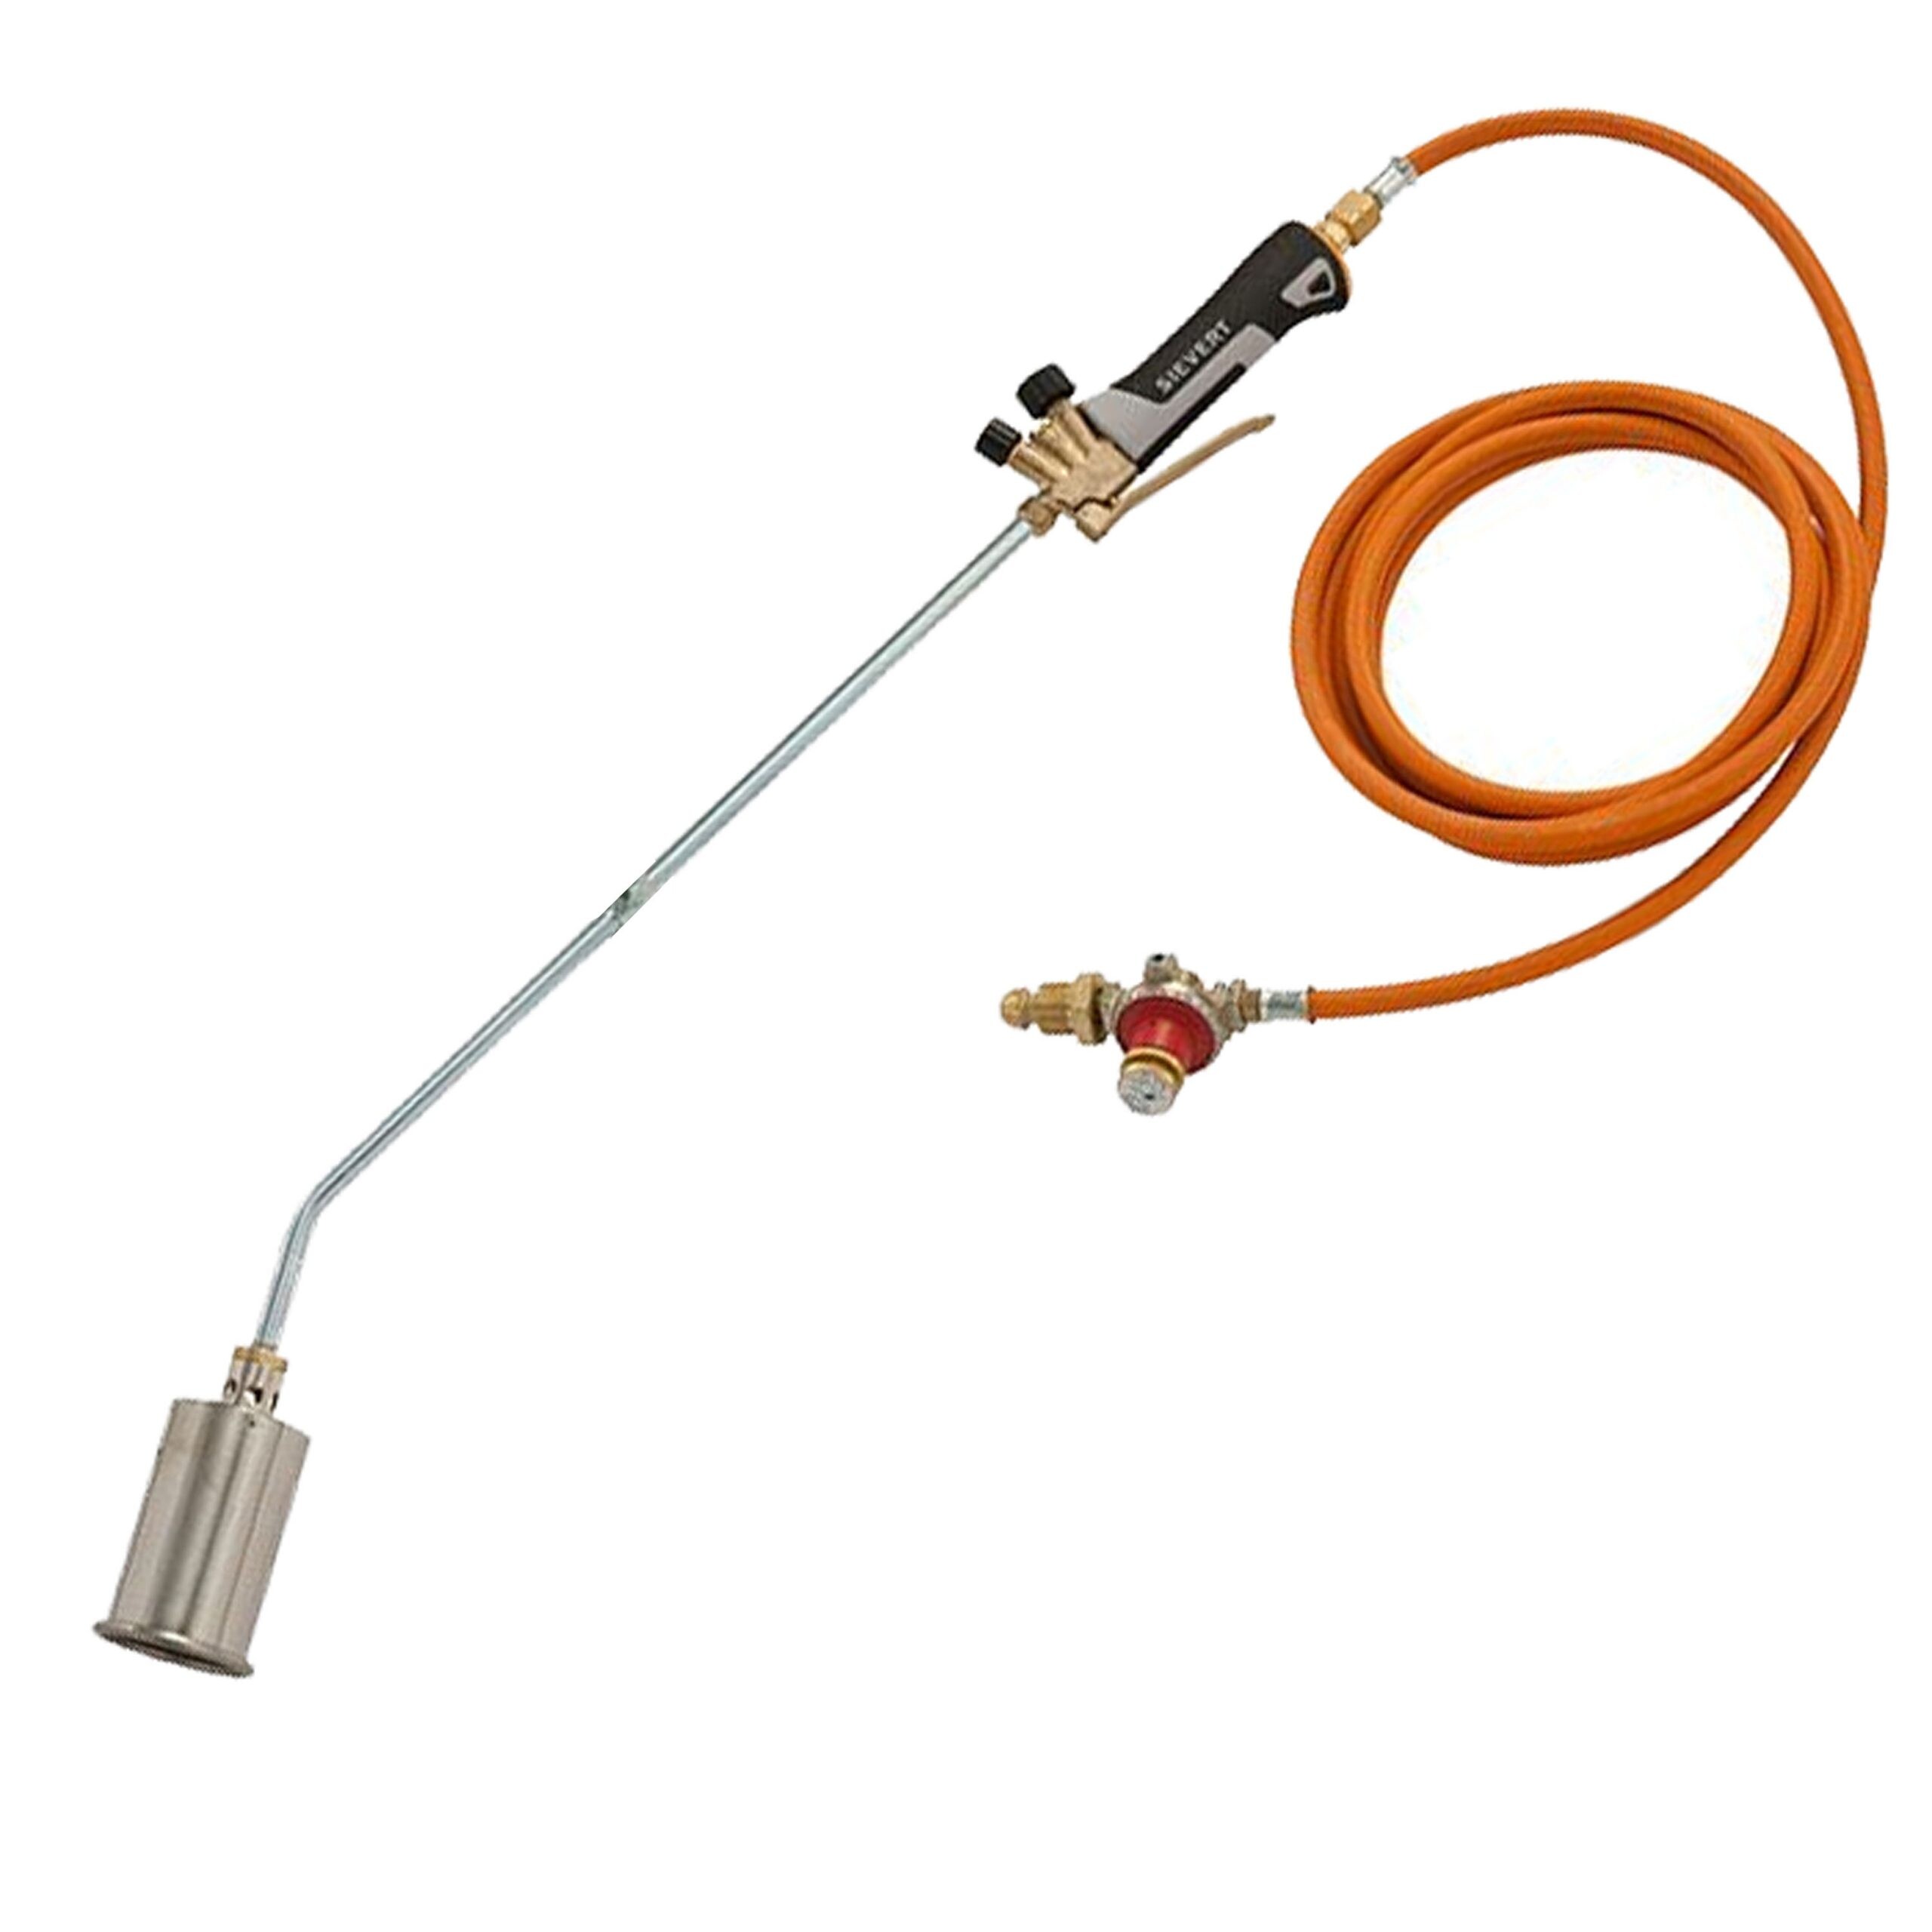 Gas Torch Single Head Burner With 1 Metre Handle